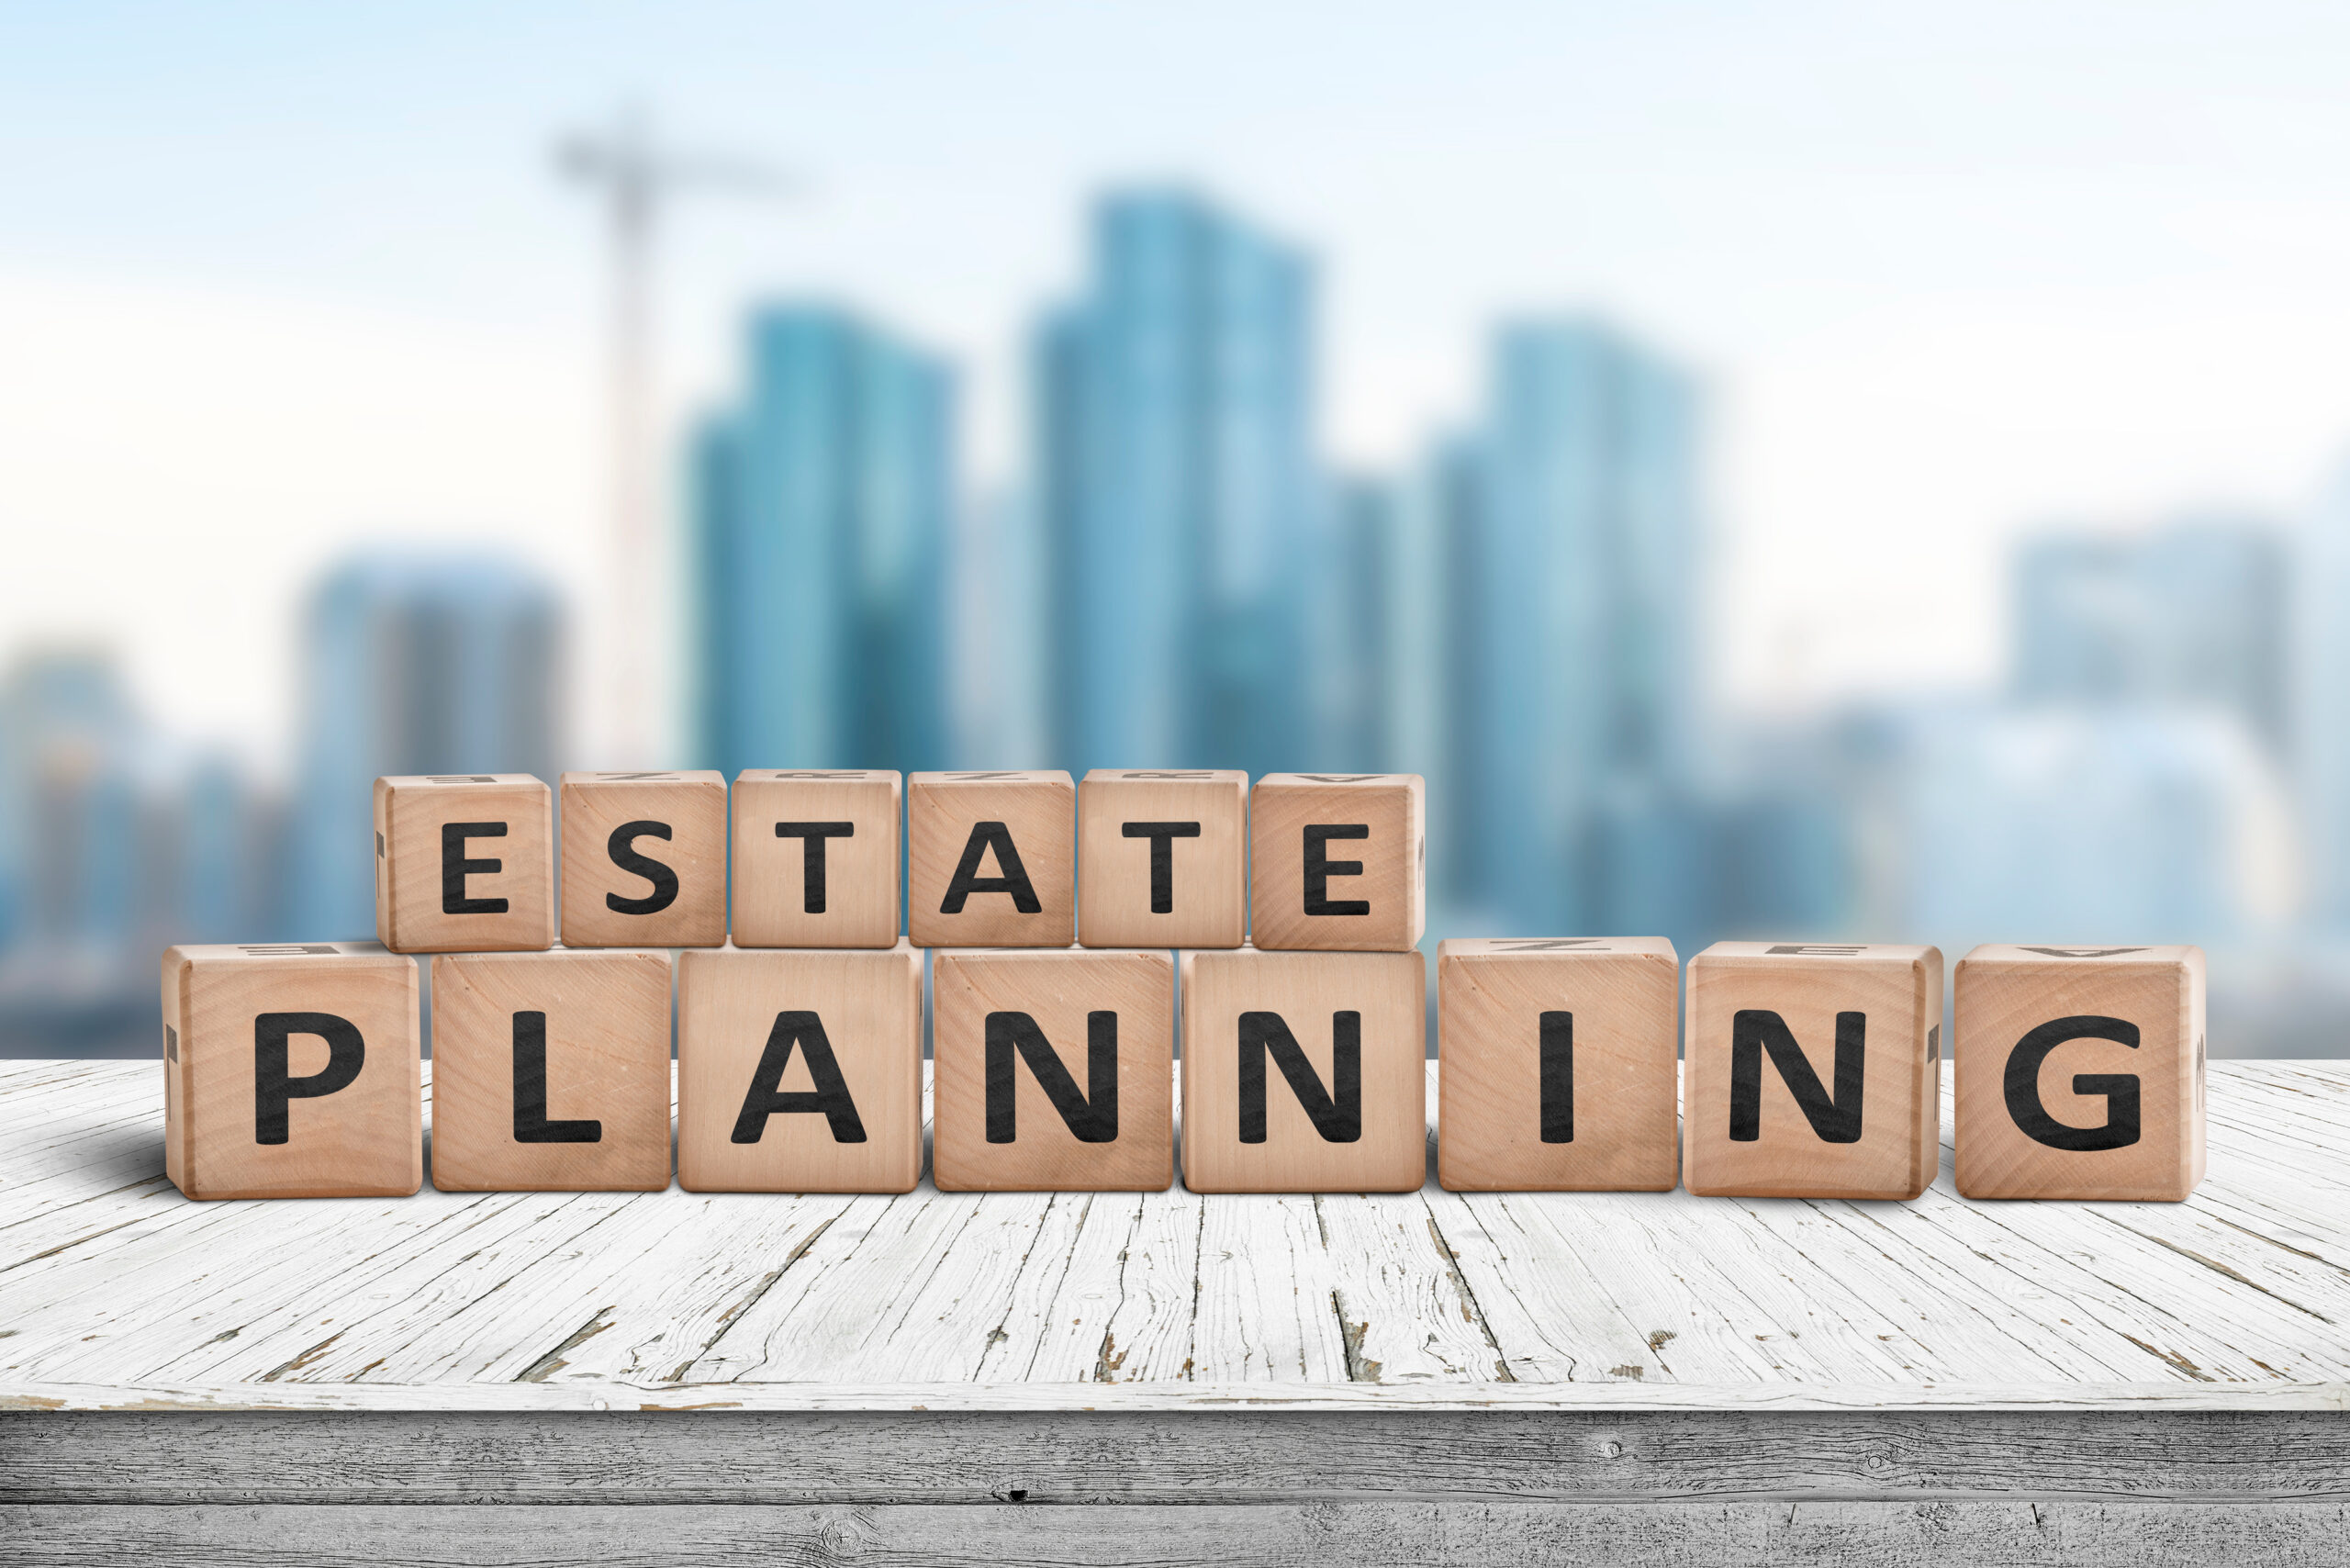 Should you consult an estate planning attorney?